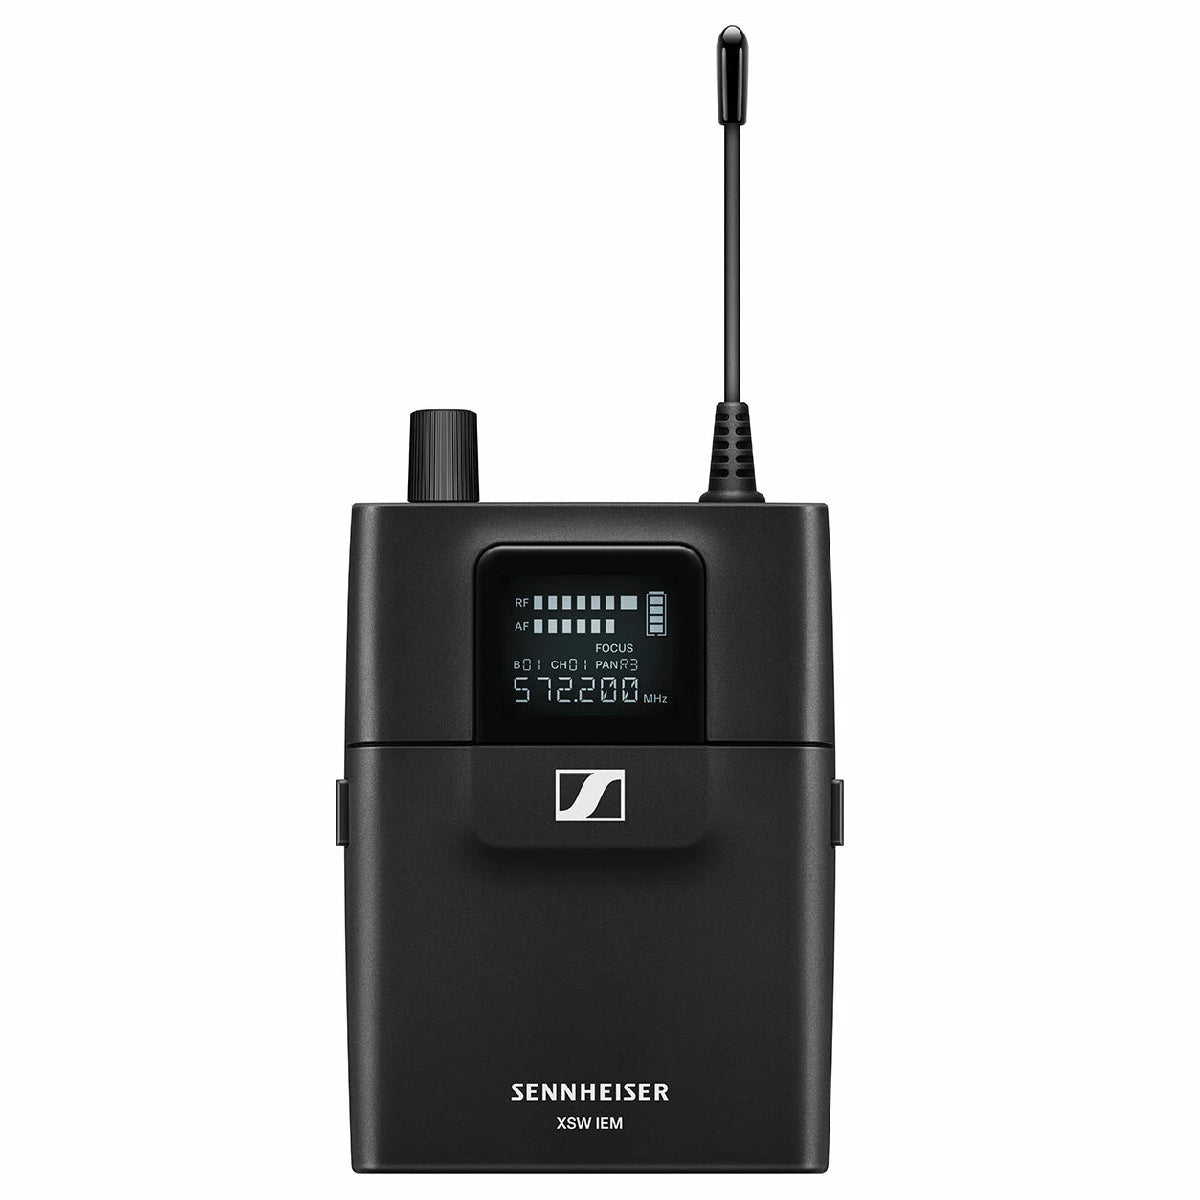 Sennheiser XSW IEM Set (A) Wireless In-ear Monitoring System (476 to 500 MHZ) Bodypack Front